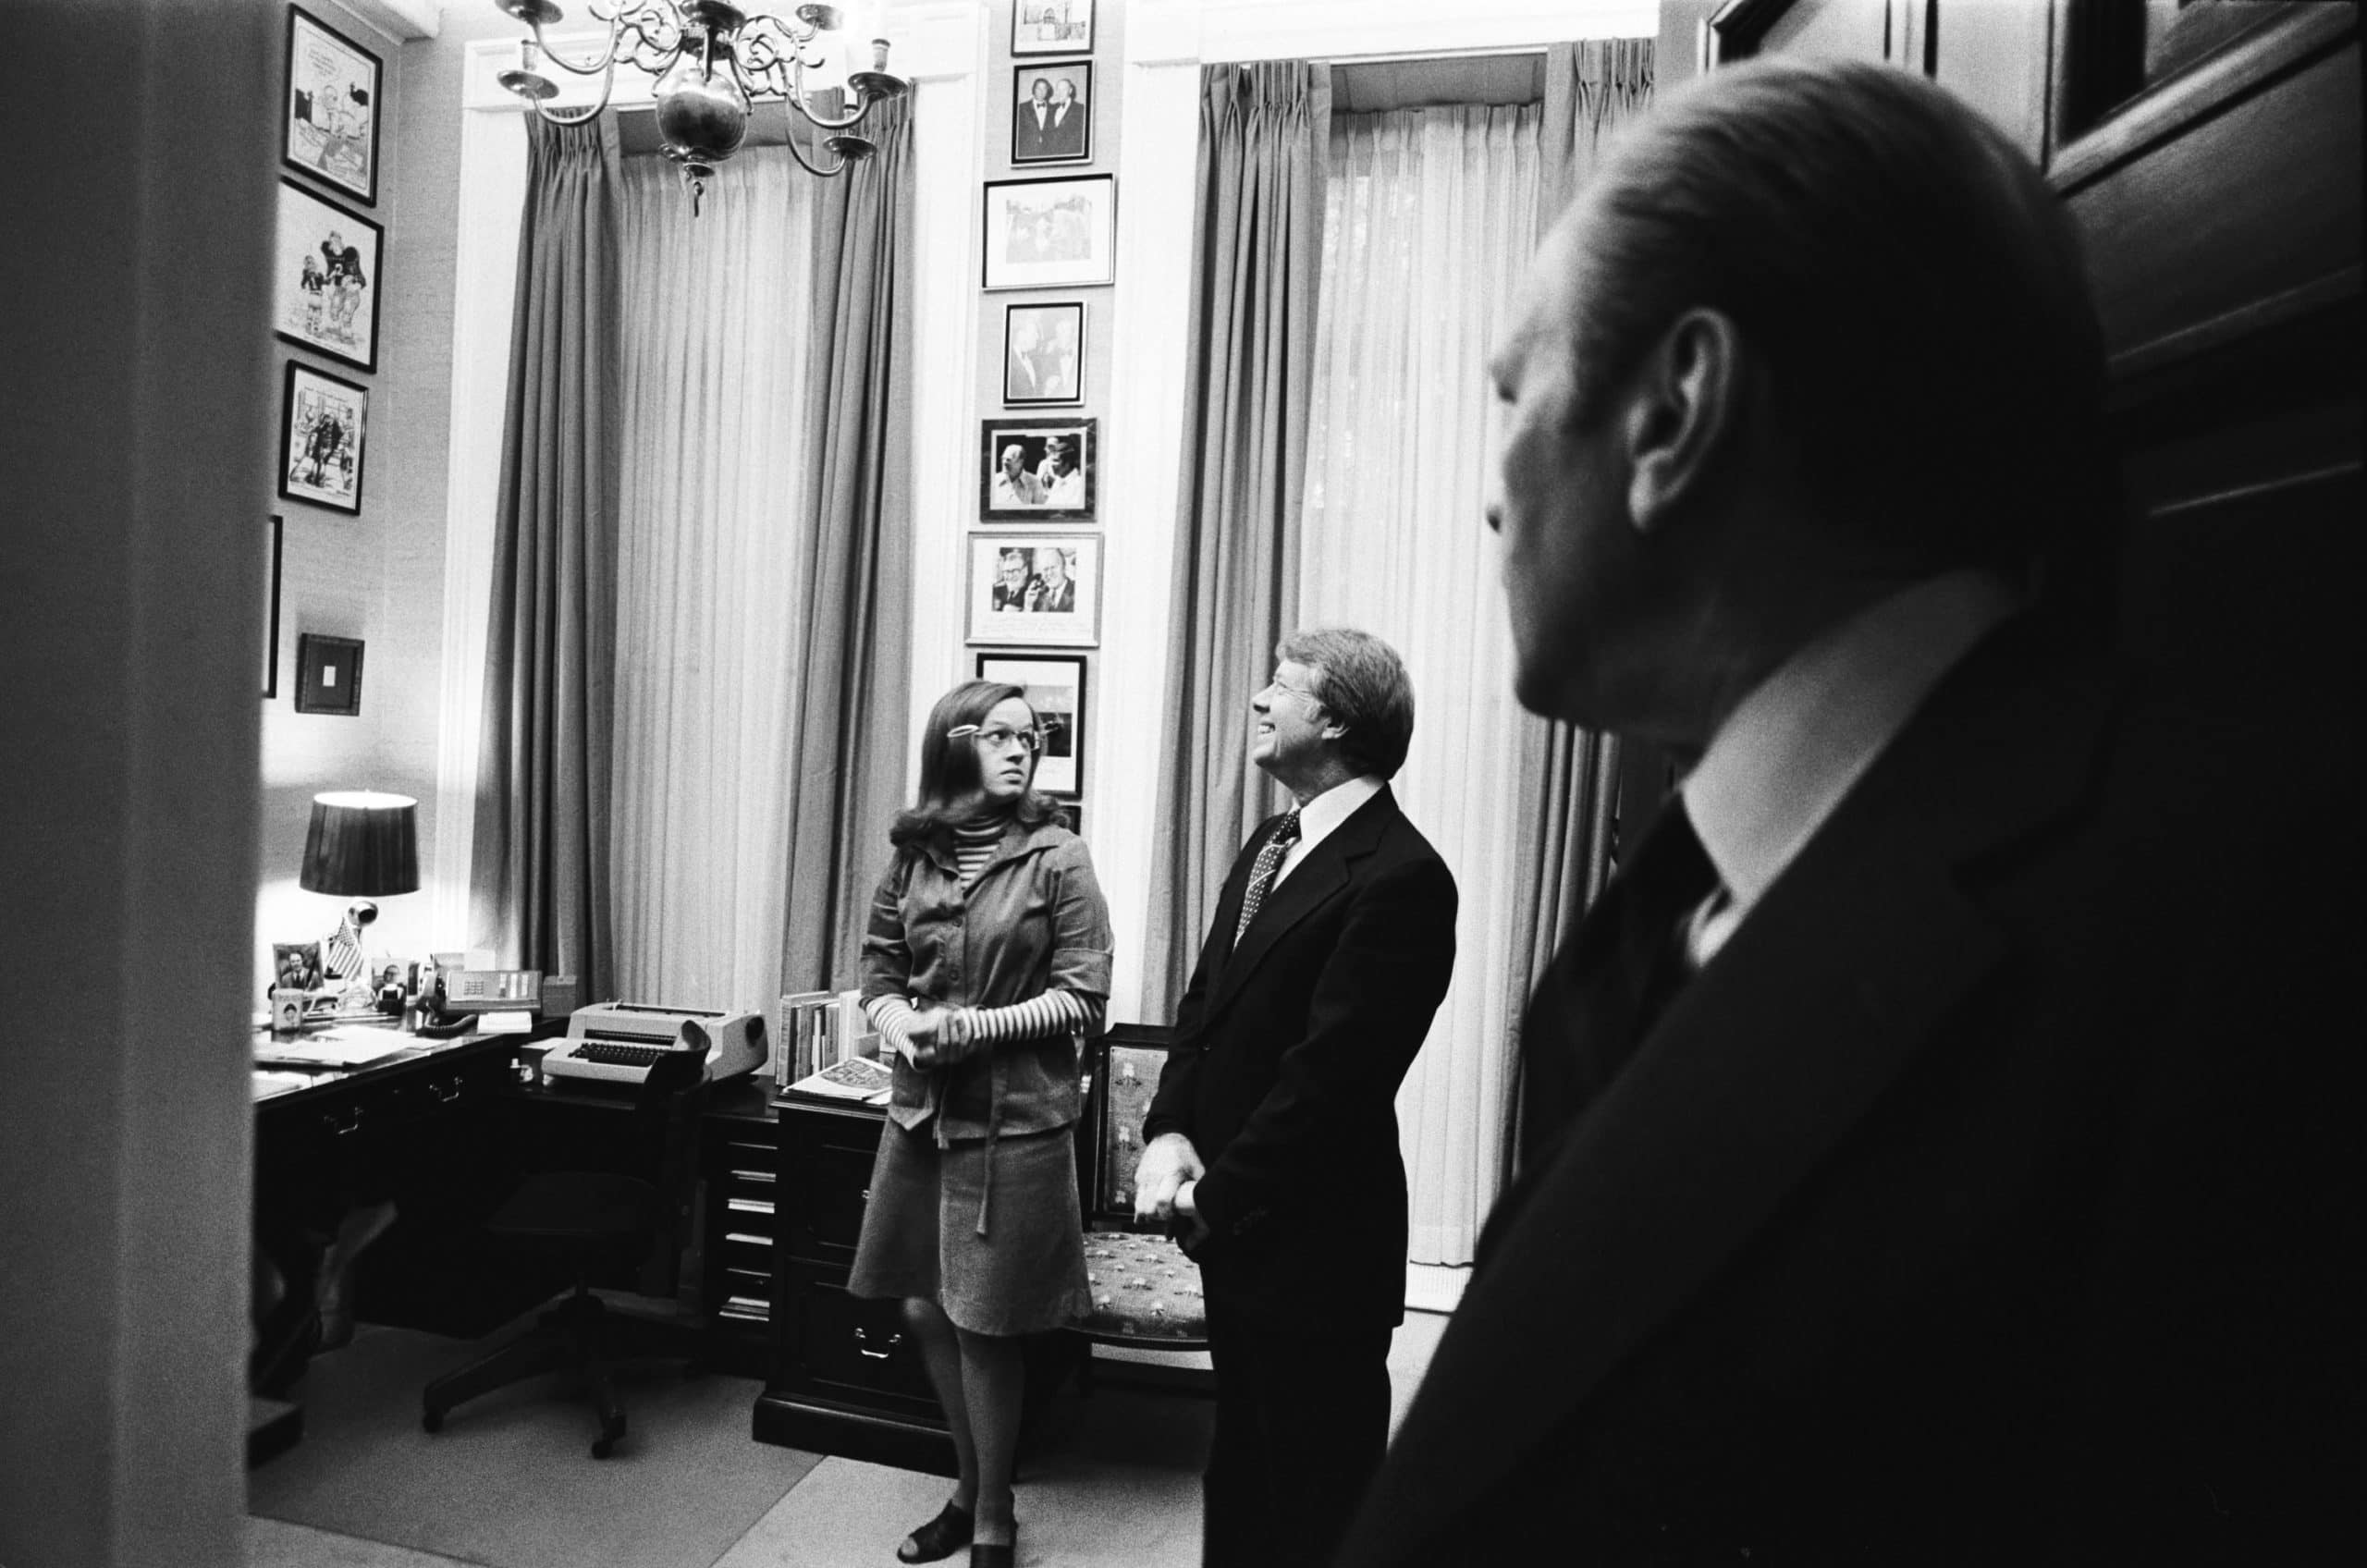 WASHINGTON DC - NOVEMBER 22: (NO U.S. TABLOID SALES) President-elect Jimmy Carter meets President FordÕs longtime personal secretary, Dorothy Downton, in the presidentÕs private study November 22, 1976. President Ford offered Carter the use of the office during the transition.(Photo by David Hume Kennerly/ Getty Images)